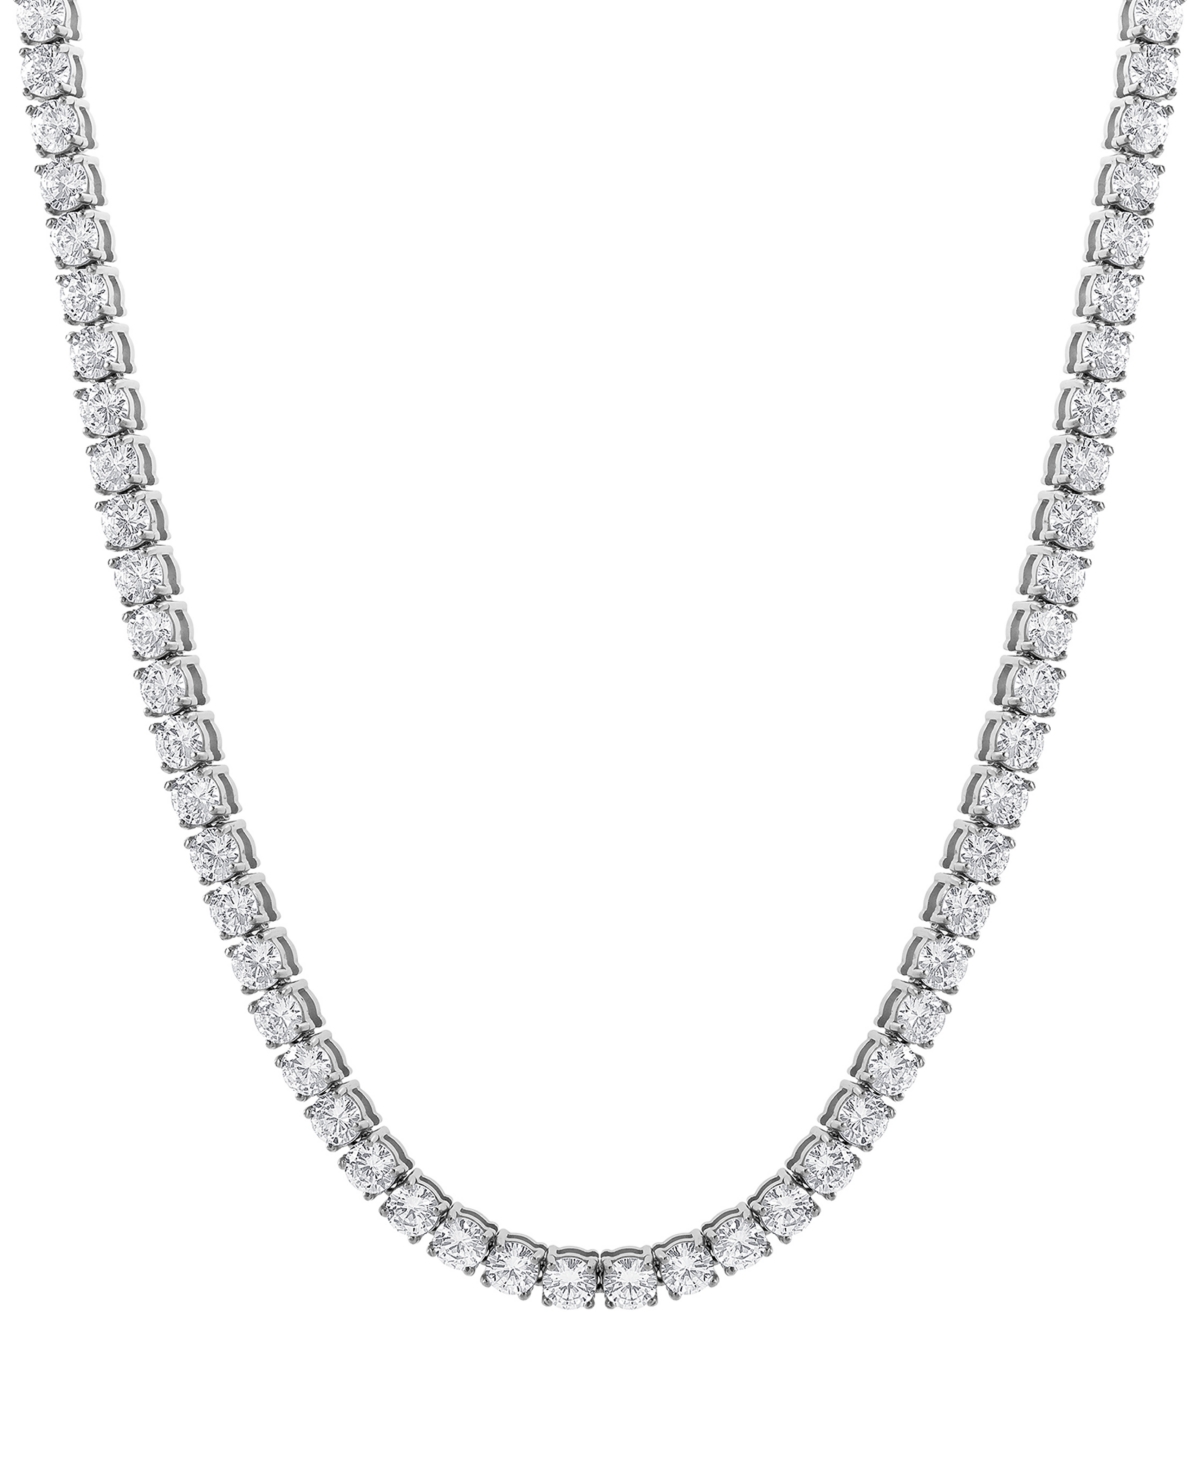 Men's Cubic Zirconia 20" Tennis Necklace in Black Ion-Plated Stainless Steel - White